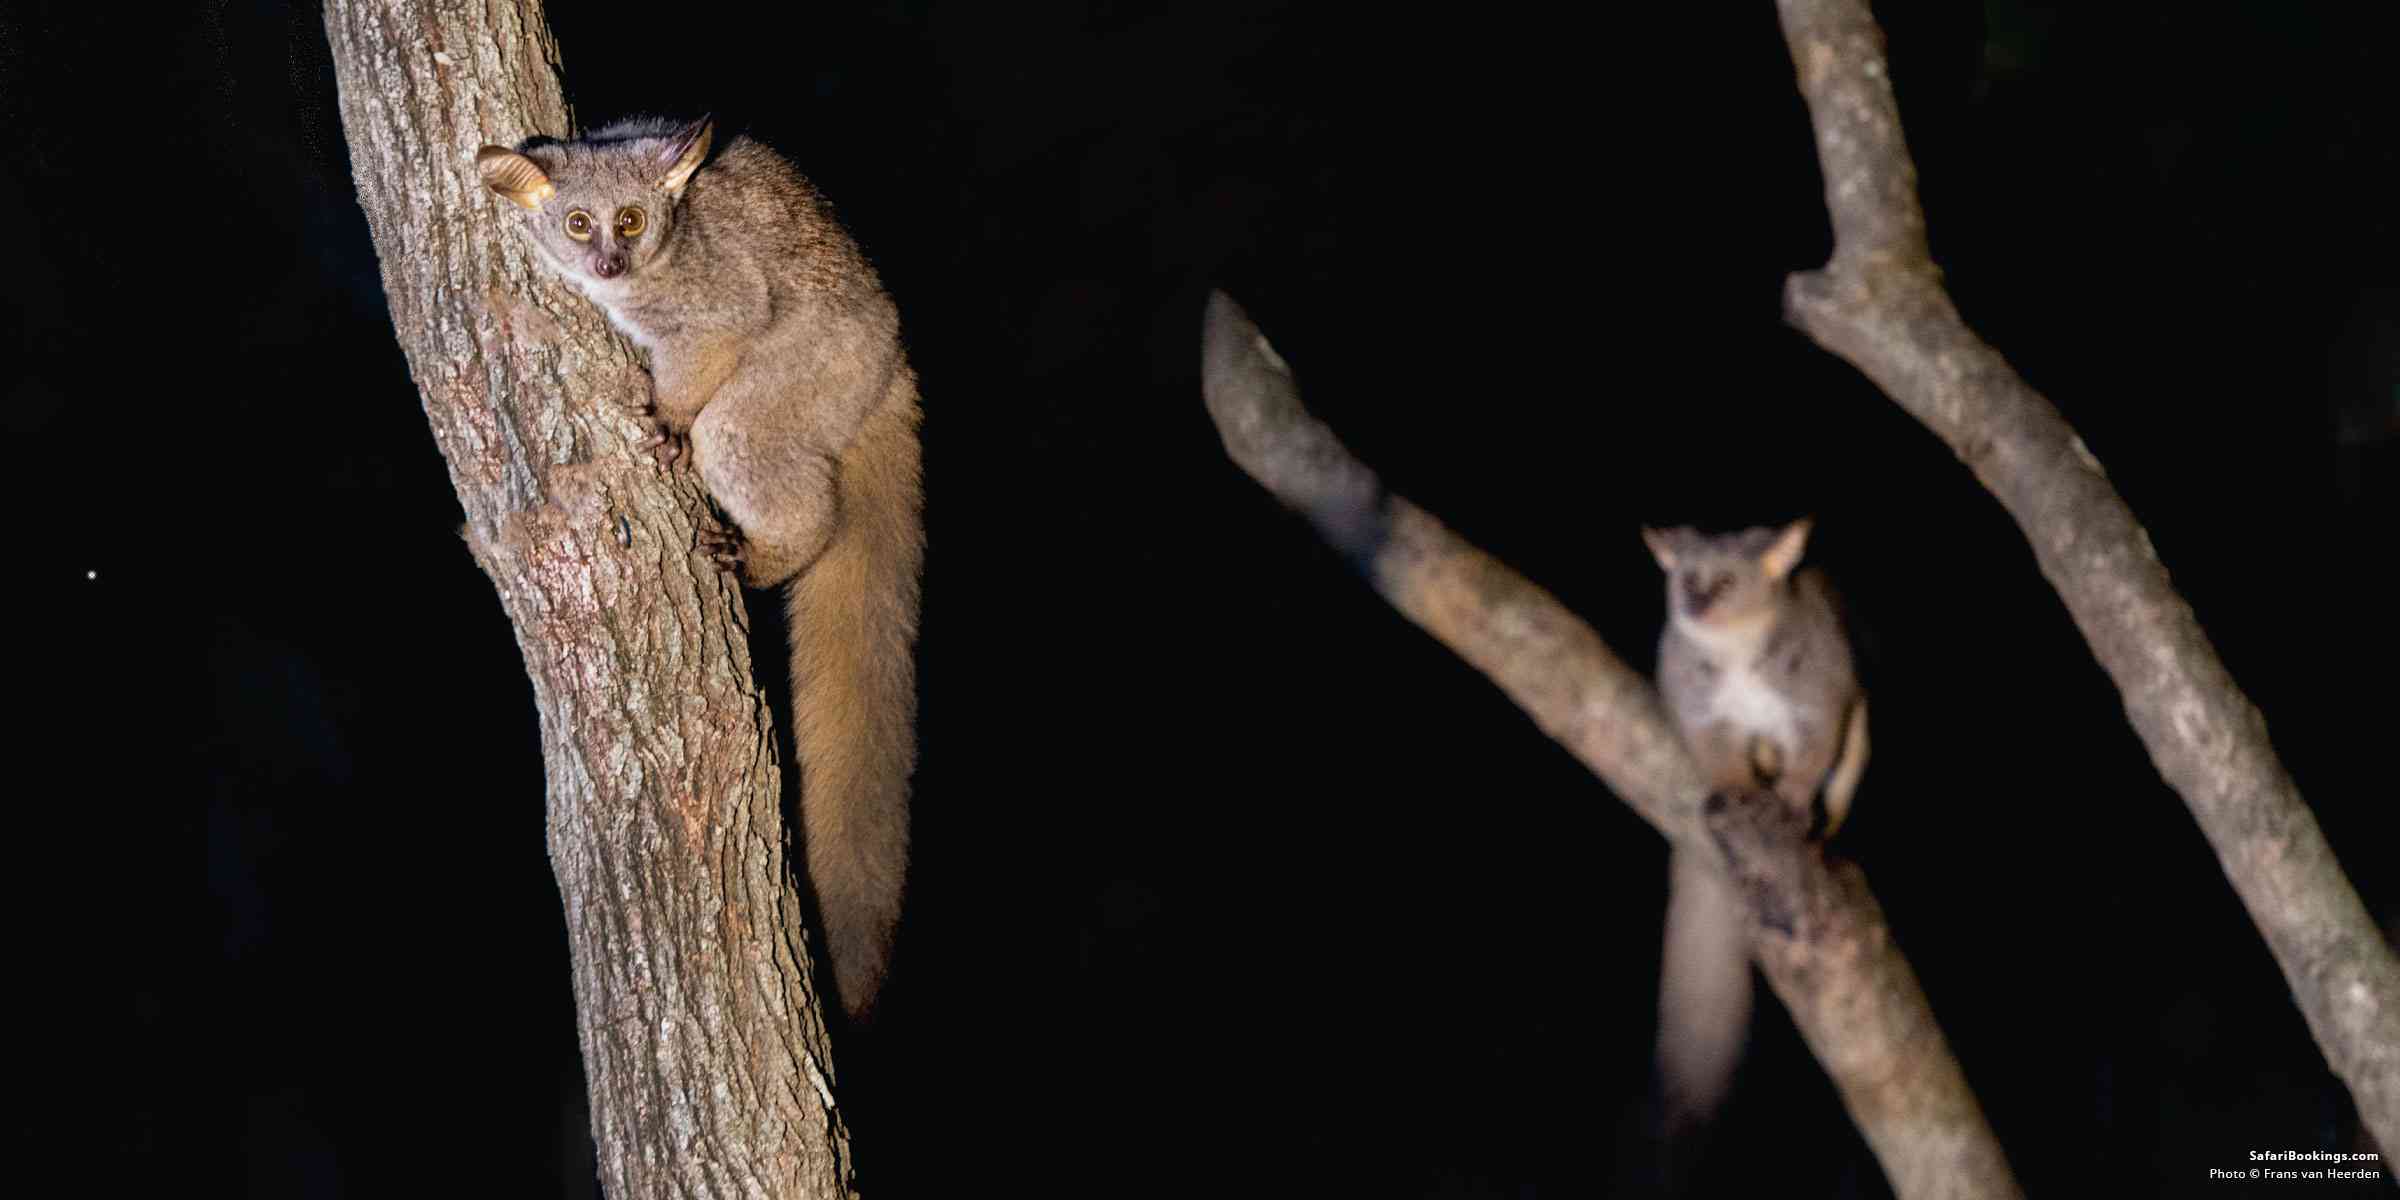 5 Fascinating Facts About Bushbabies